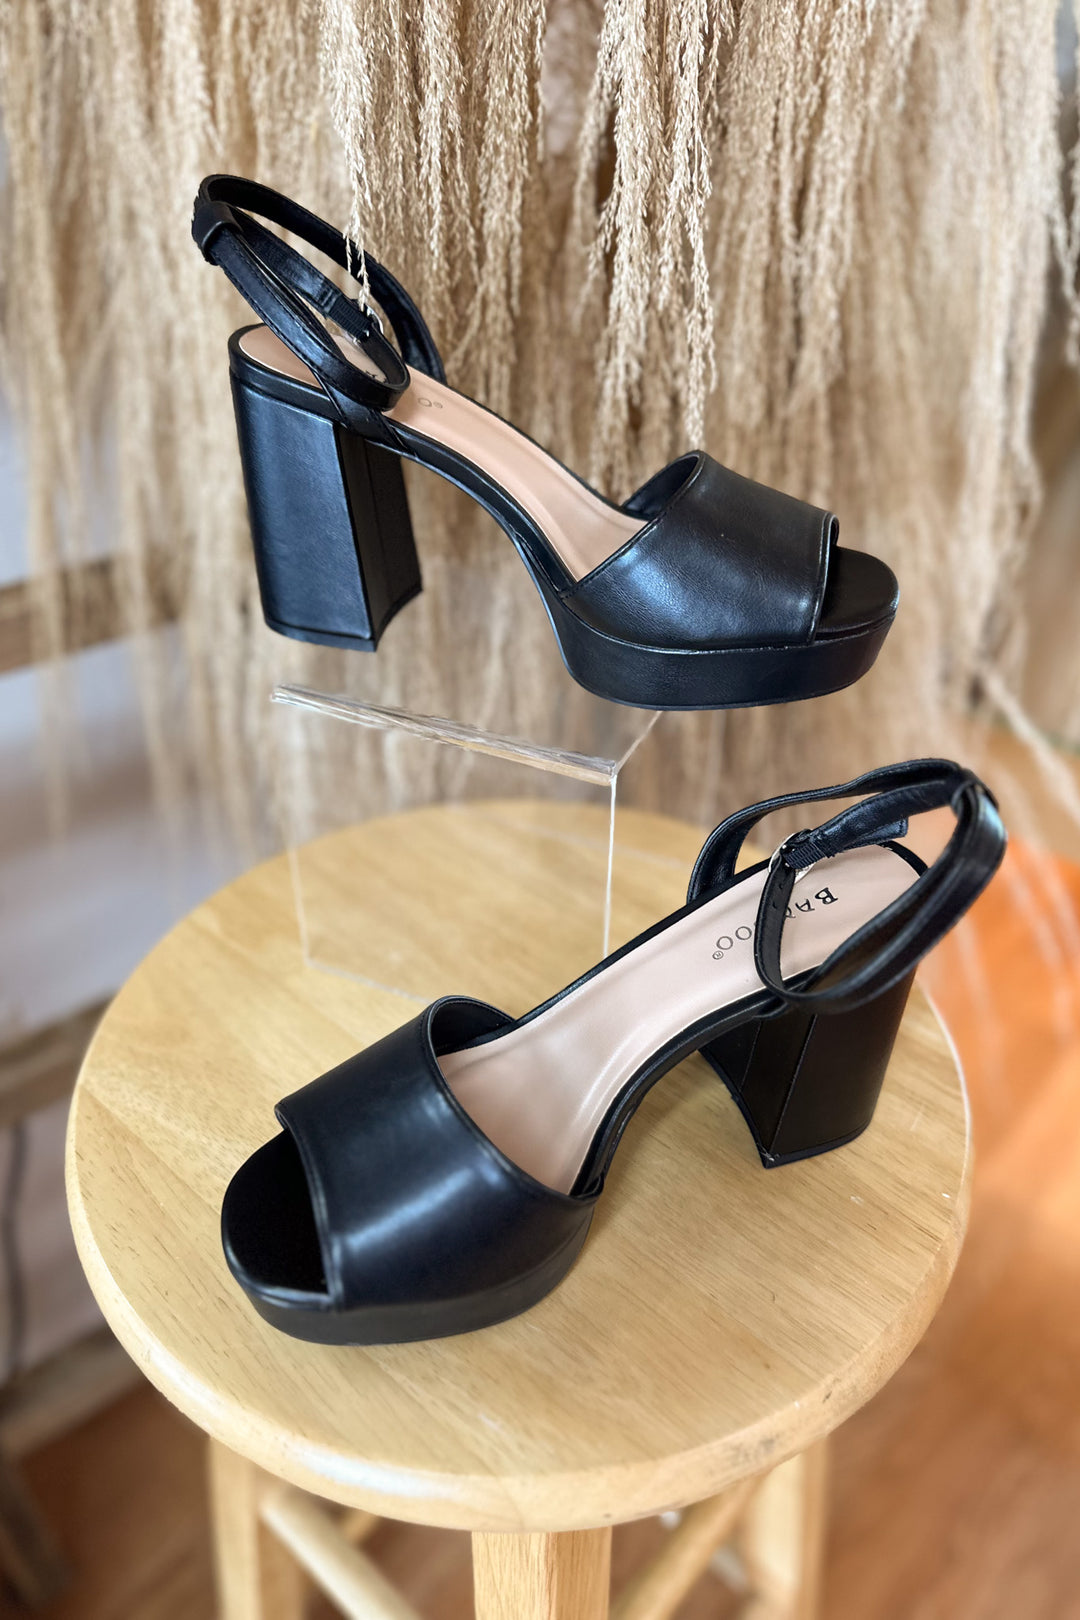 Step Up Heels in Black - Shop Spoiled Boutique 